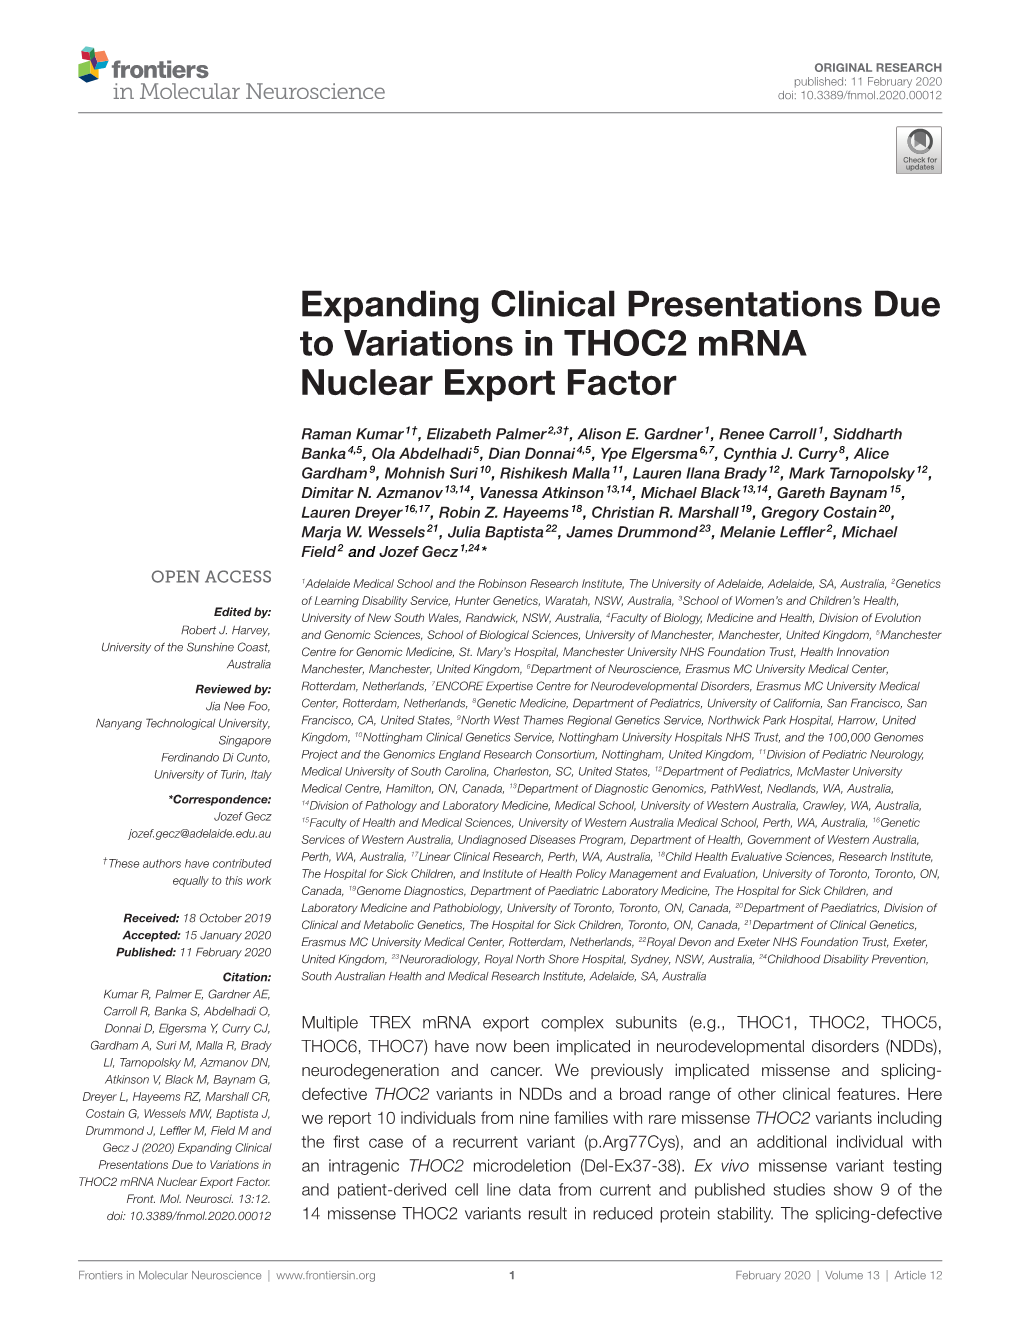 Expanding Clinical Presentations Due to Variations in THOC2 Mrna Nuclear Export Factor